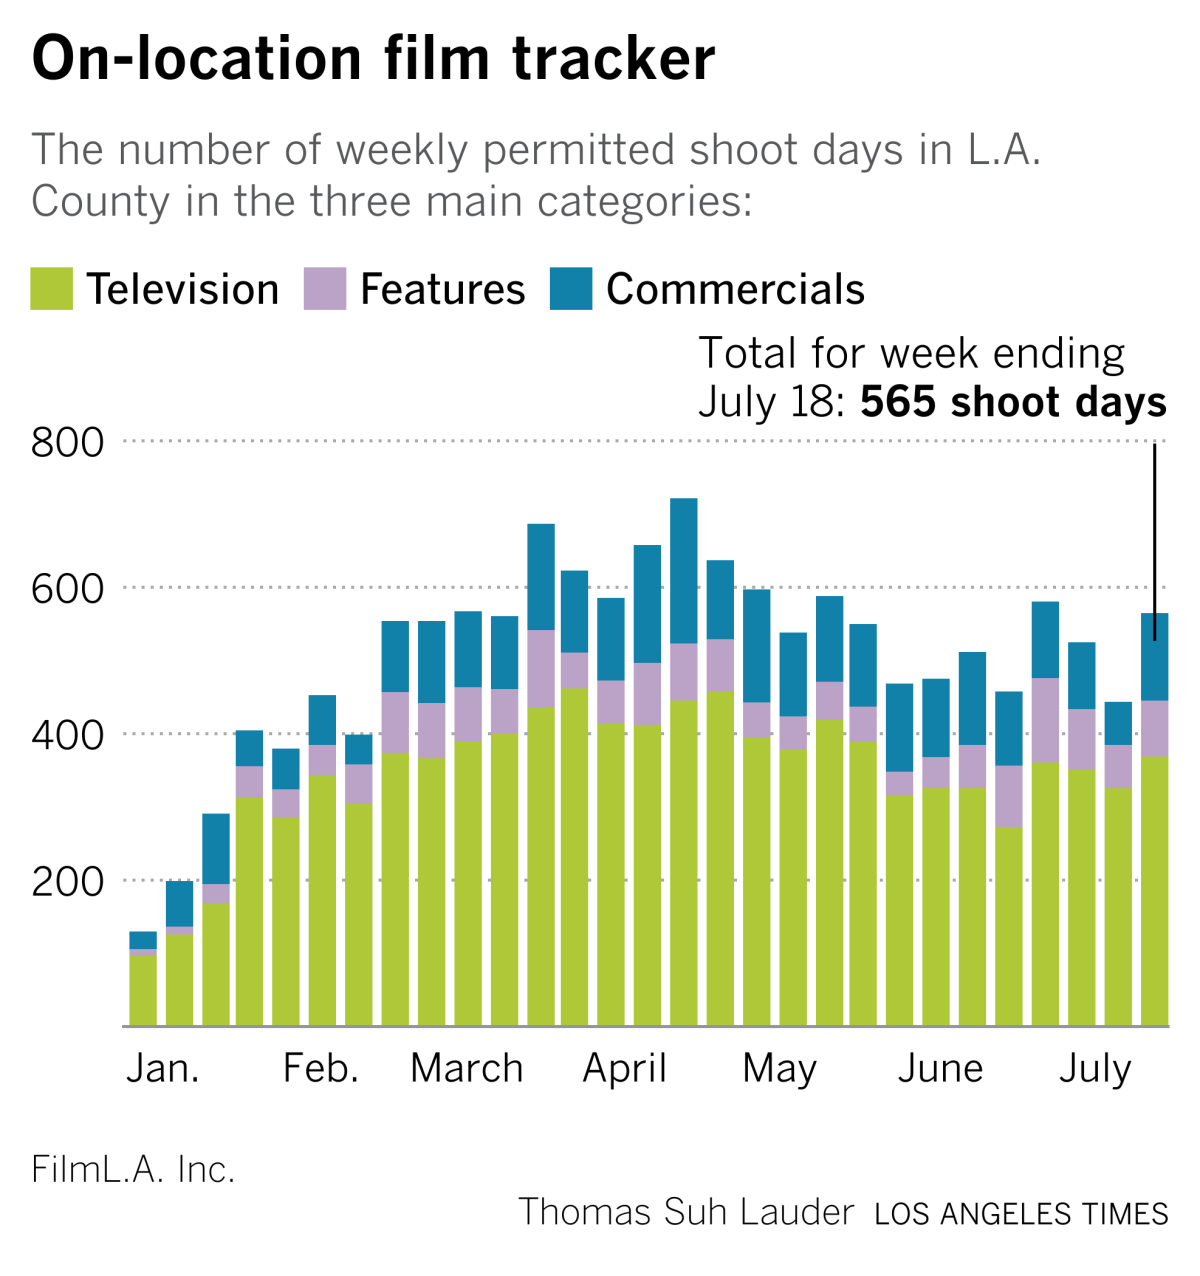 A bar chart shows 565 on-location shoot days for the week ending July 18 in L.A. County